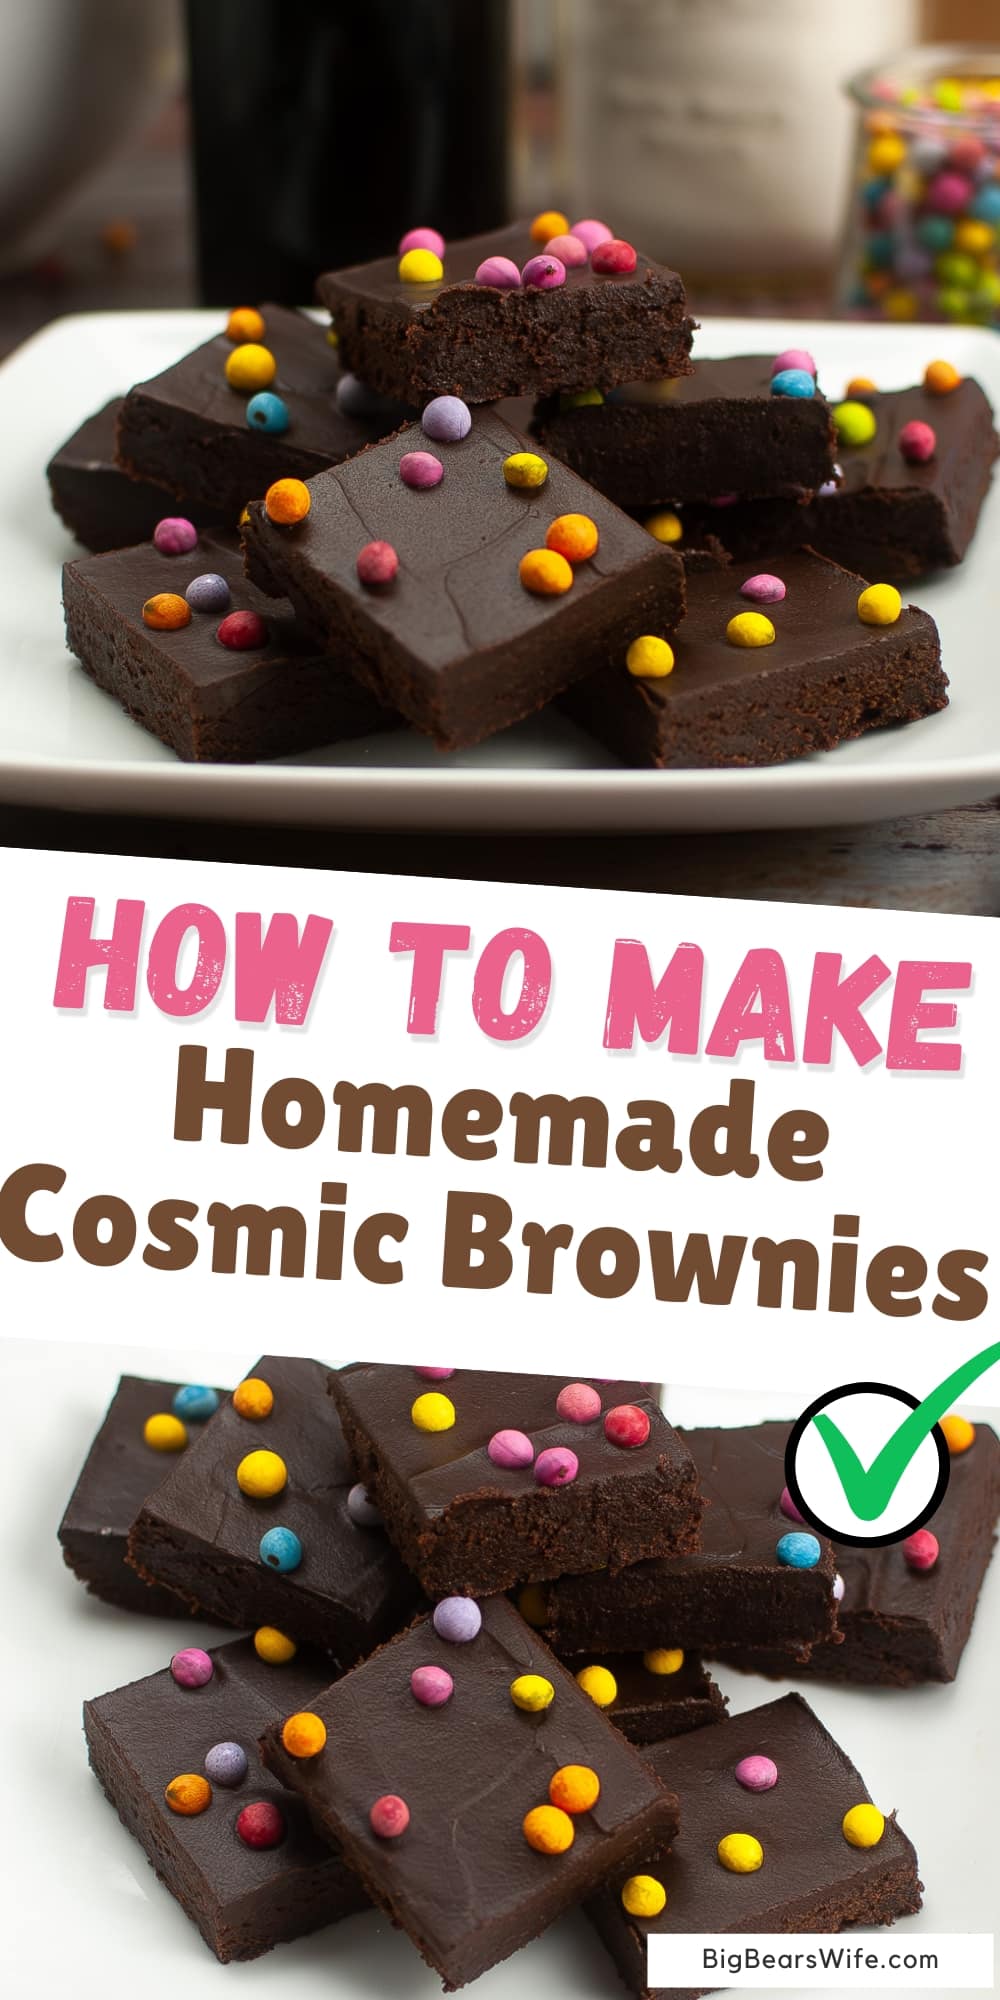 Do you love those little Cosmic Brownies from the grocery store? Let's make a homemade version that is just as good!  via @bigbearswife